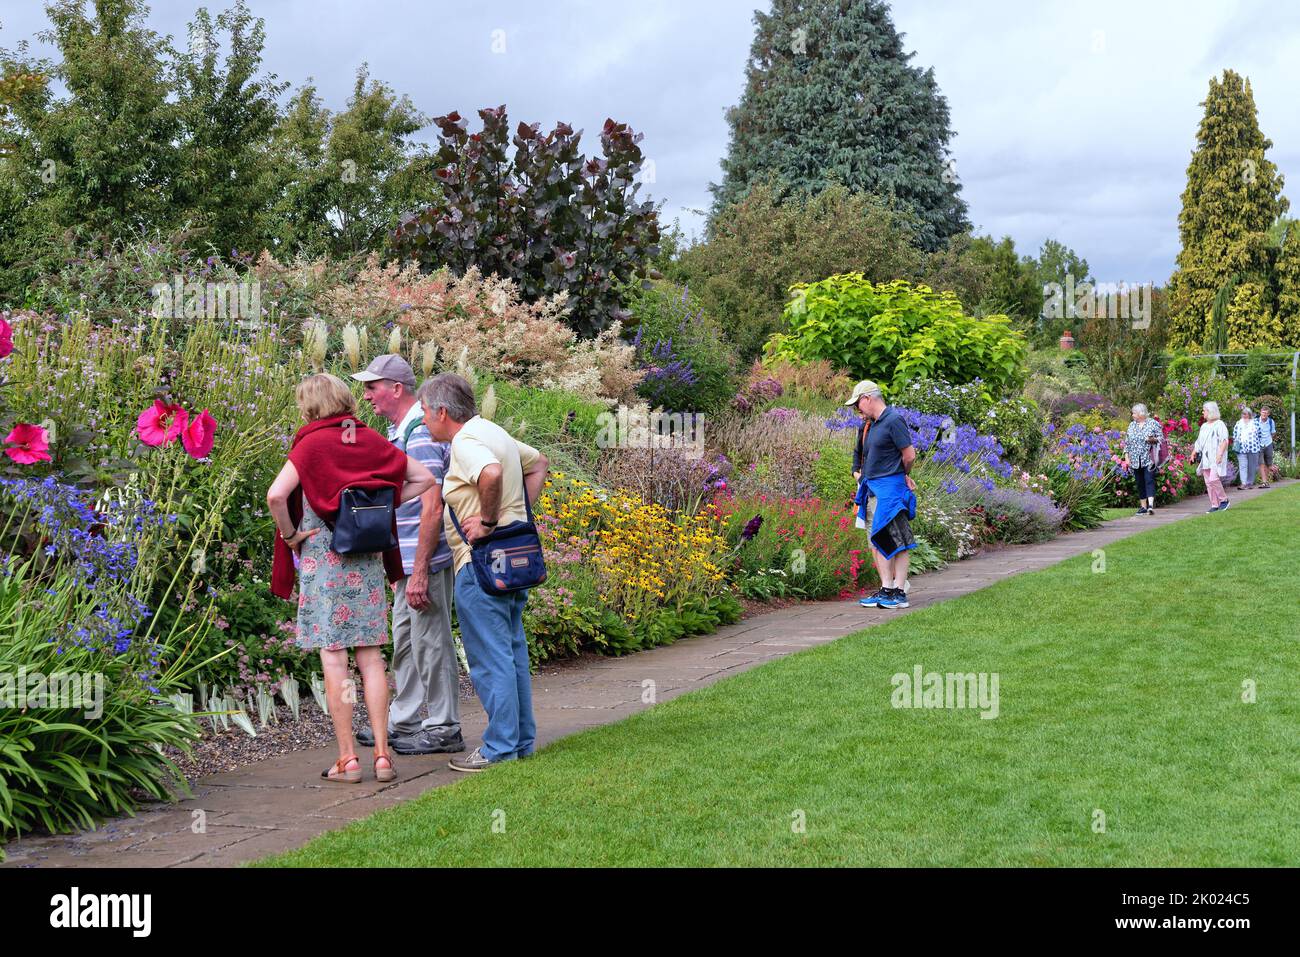 Visitors at the RHS gardens, Wisley admiring the colourful herbaceous borders in full bloom, Surrey England UK Stock Photo